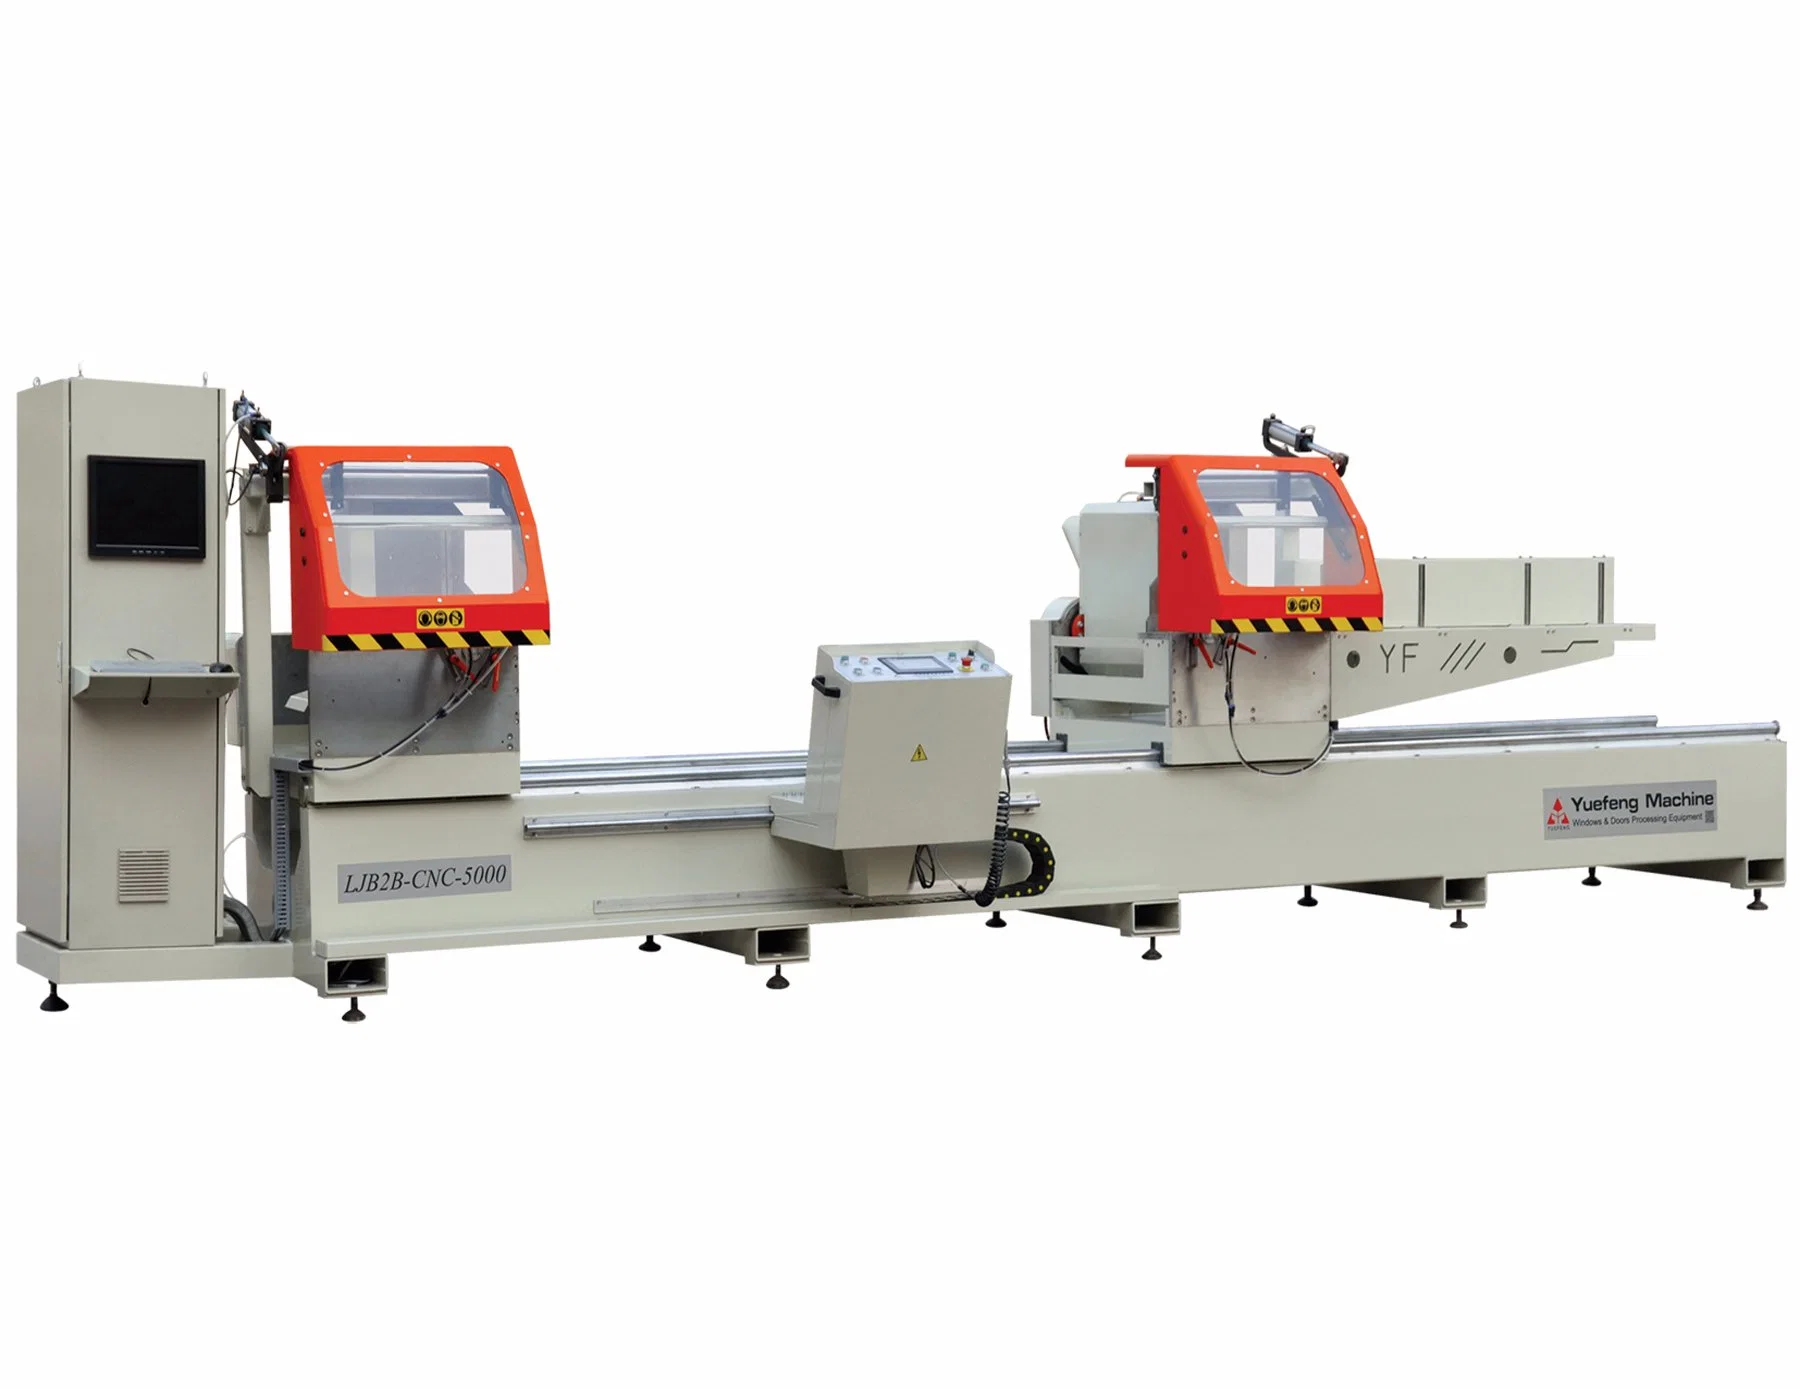 Guaranteed Quality Cutting Aluminum Profiles Between 22.5-90 Window Making Machine Aluminum machine Arbitray Angle Single Mitre Saw with Convenience and Safety